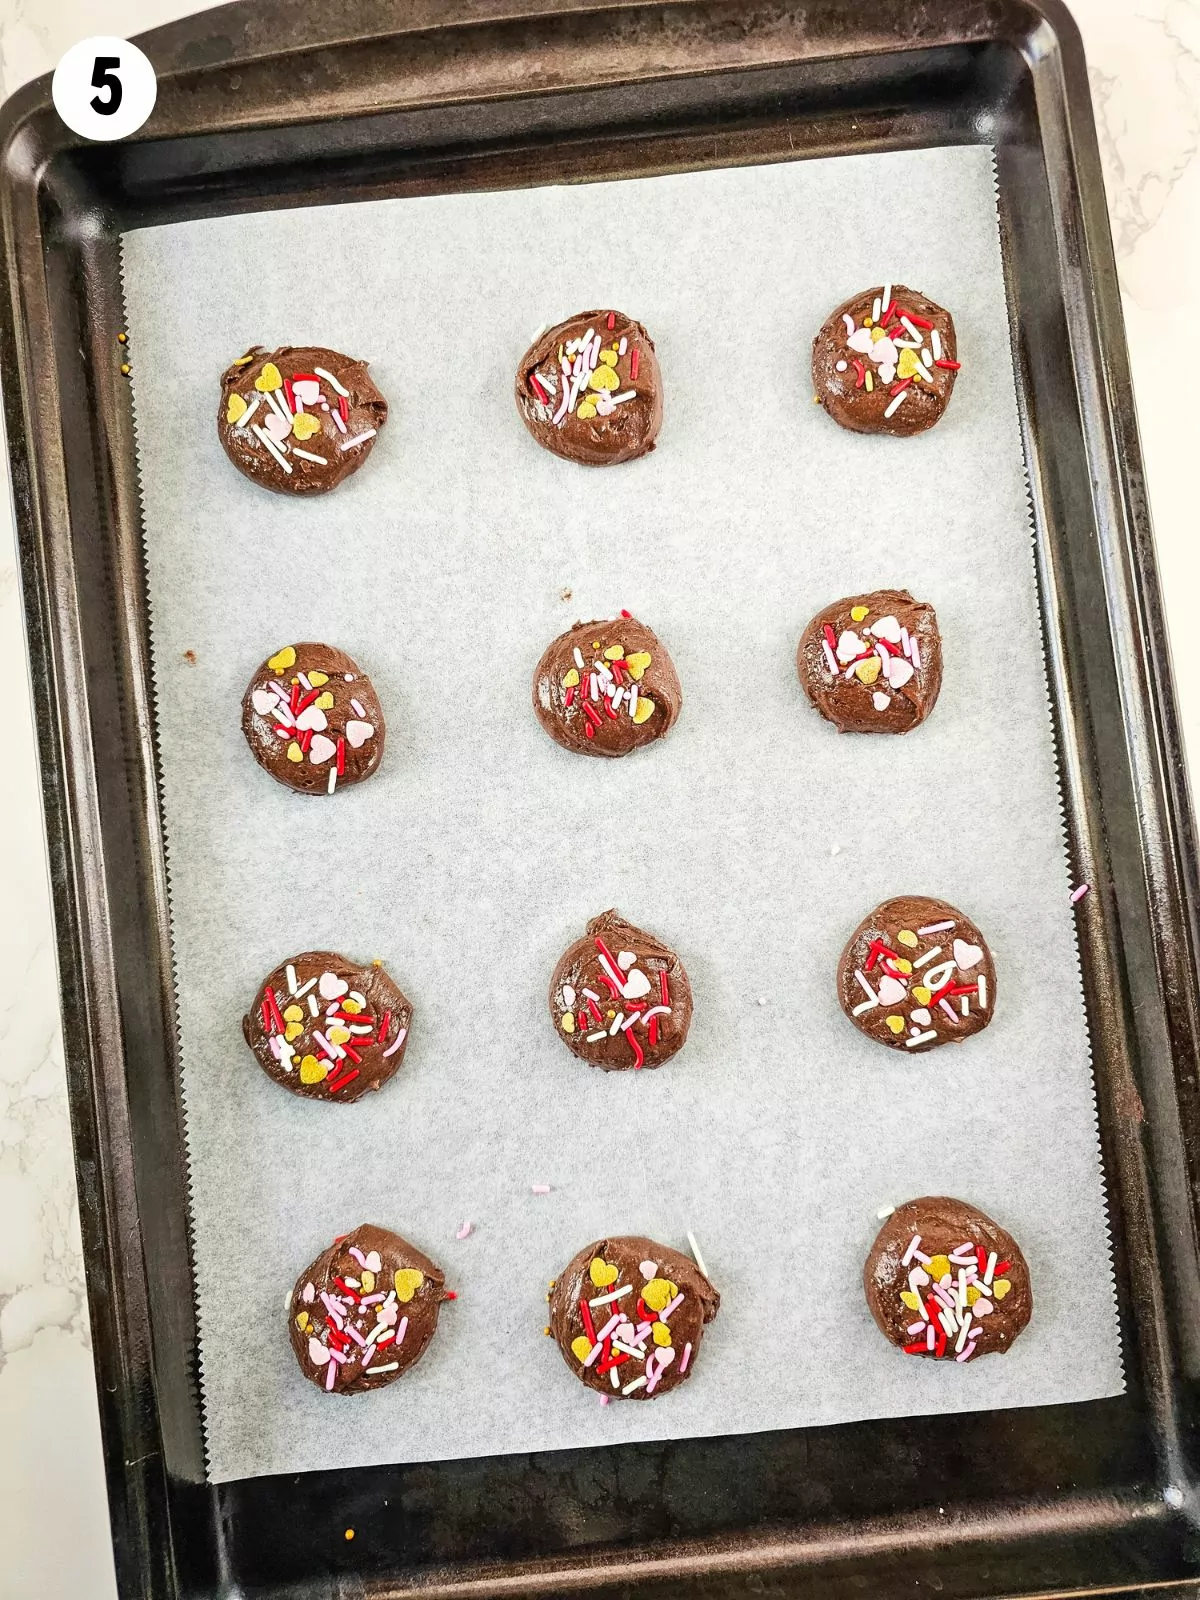 chocolate cake mix cookies on baking tray with parchment paper.